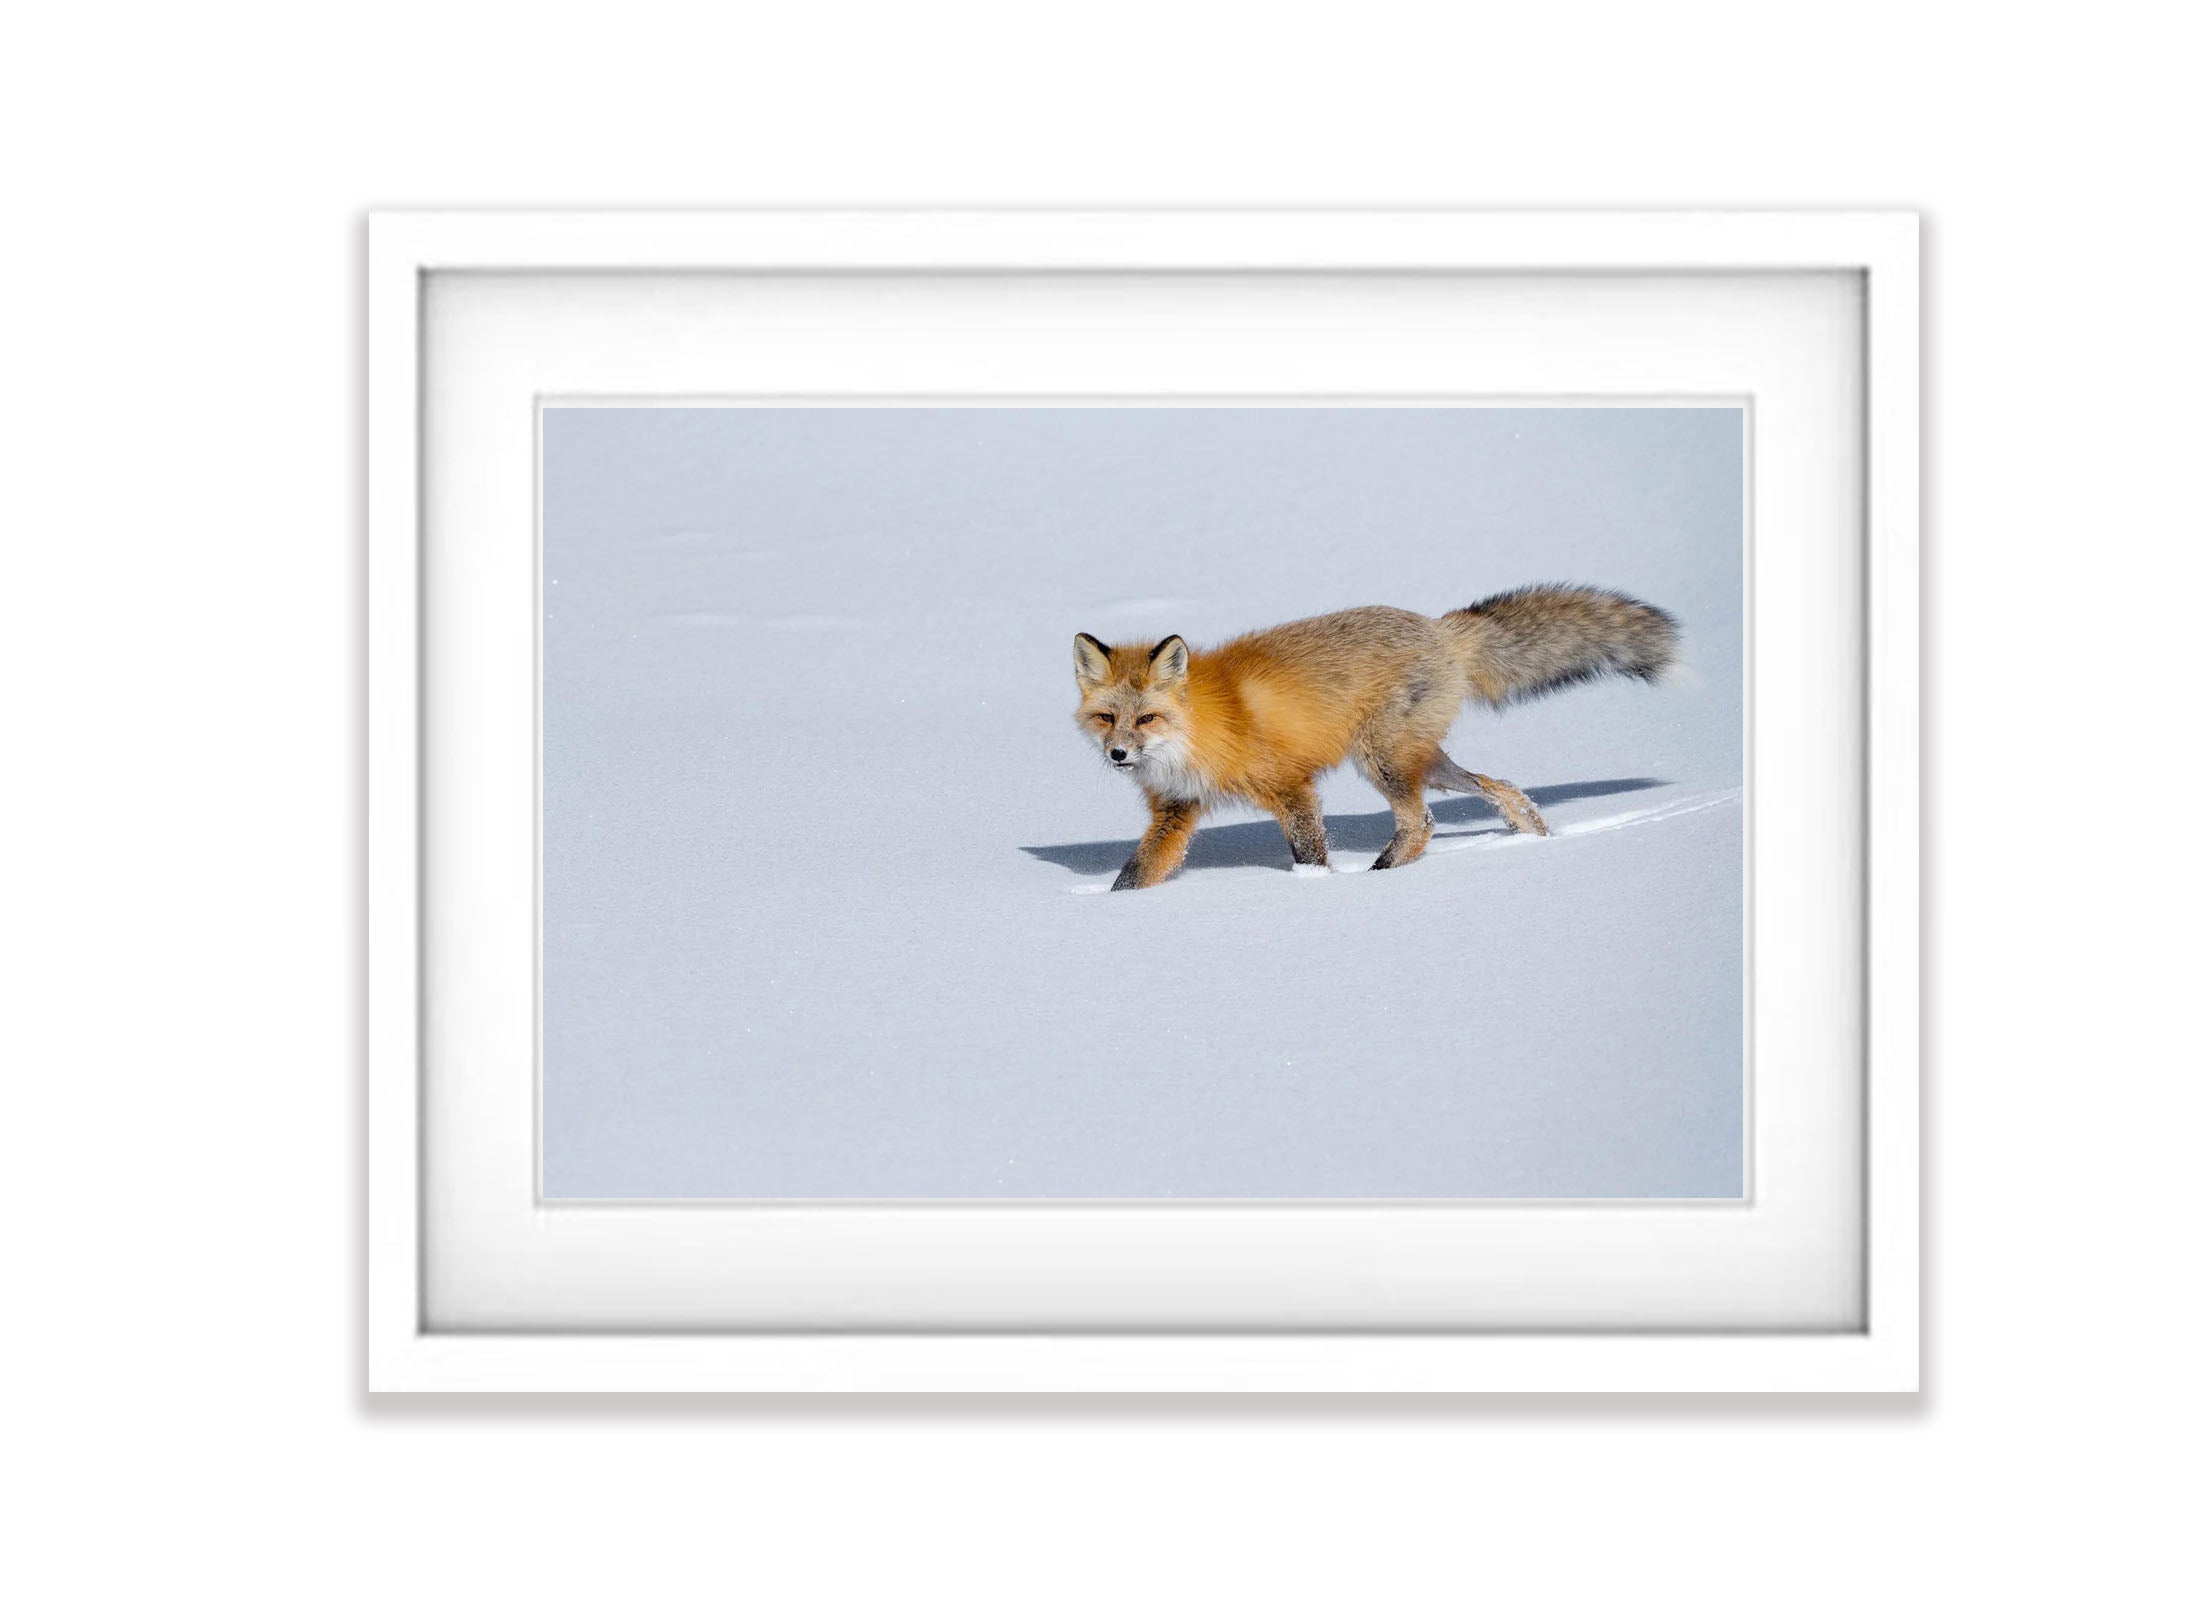 The Fox on The Prowl, Yellowstone NP